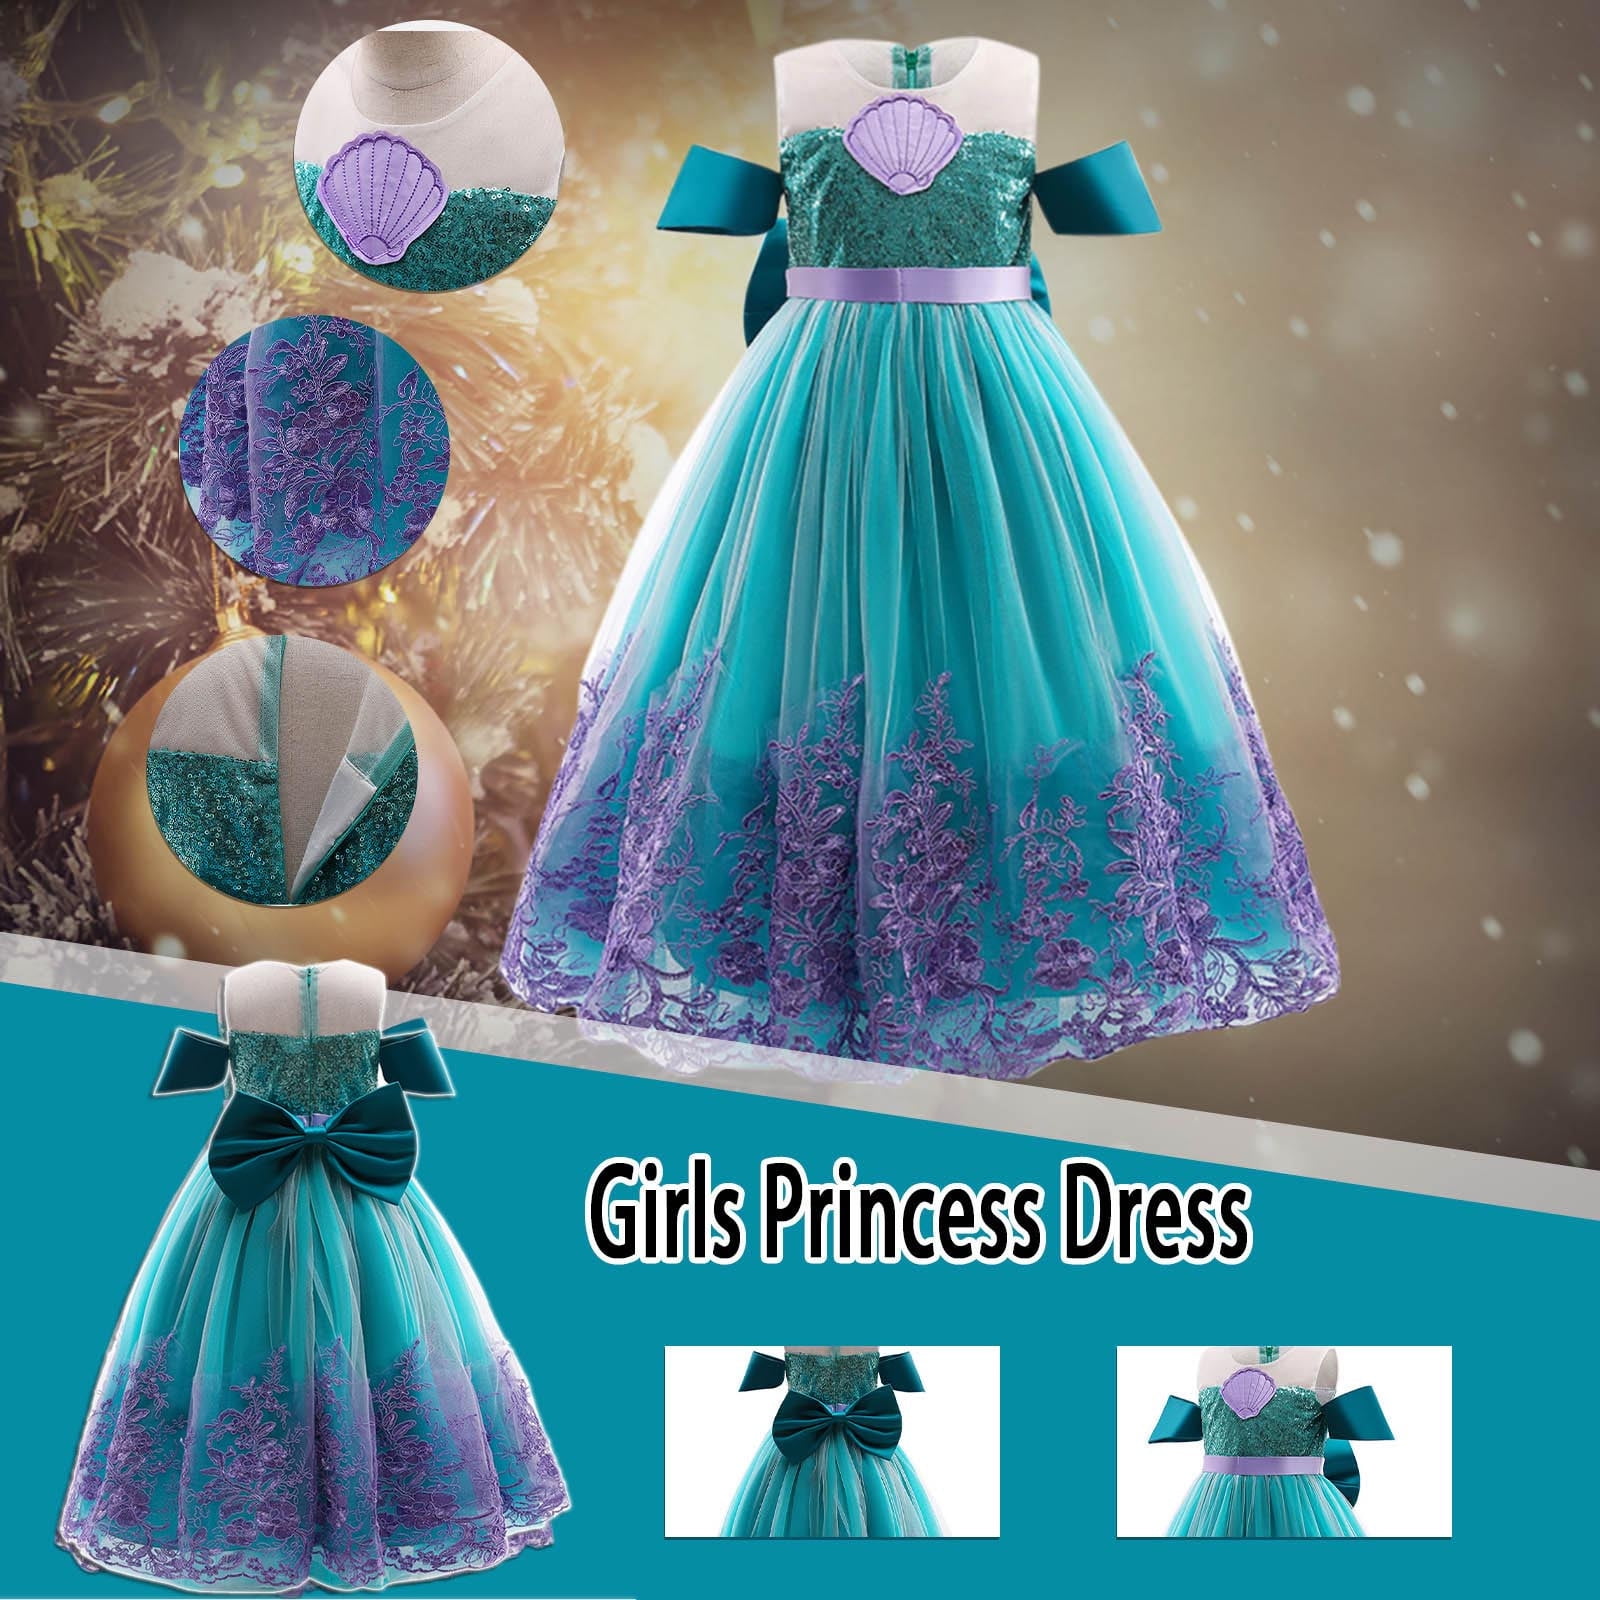 Princess Lilac Long Girls Pageant Dresses Kids Prom Puffy Tulle Ball Gown